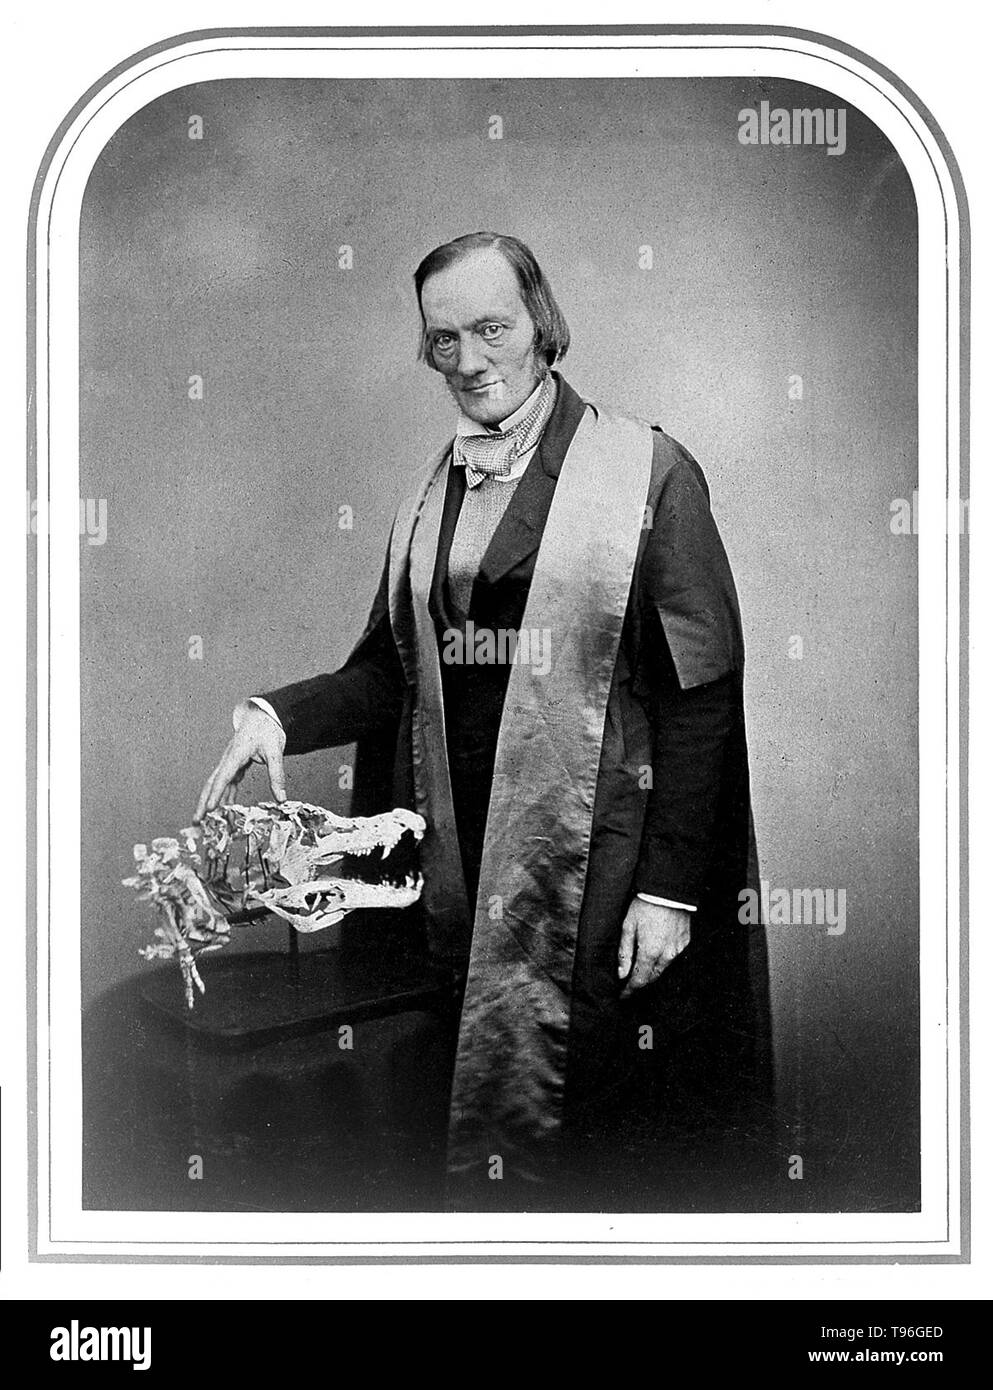 Richard Owen (July 20, 1804 - December 18, 1892) was an English biologist, comparative anatomist and paleontologist. One of his positions was that of prosector for the London Zoo, which meant that he had to dissect and preserve any zoo animals that died in captivity. This gave him vast experience with the anatomy of exotic animals. He produced a vast array of scientific work, but is probably best remembered today for coining the word Dinosauria. Stock Photo